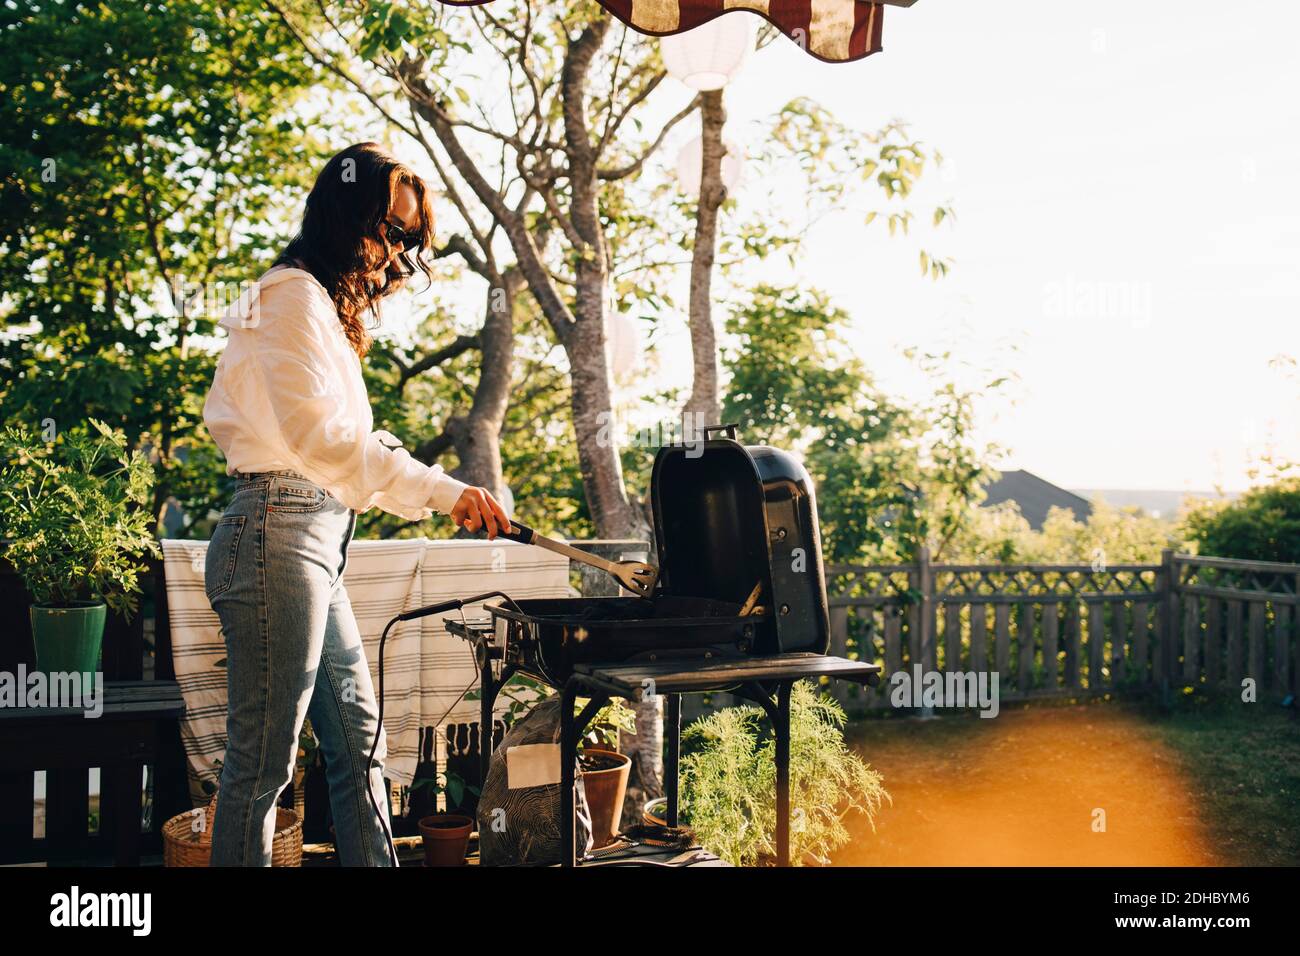 Woman grilling food on barbecue at yard during summer Stock Photo